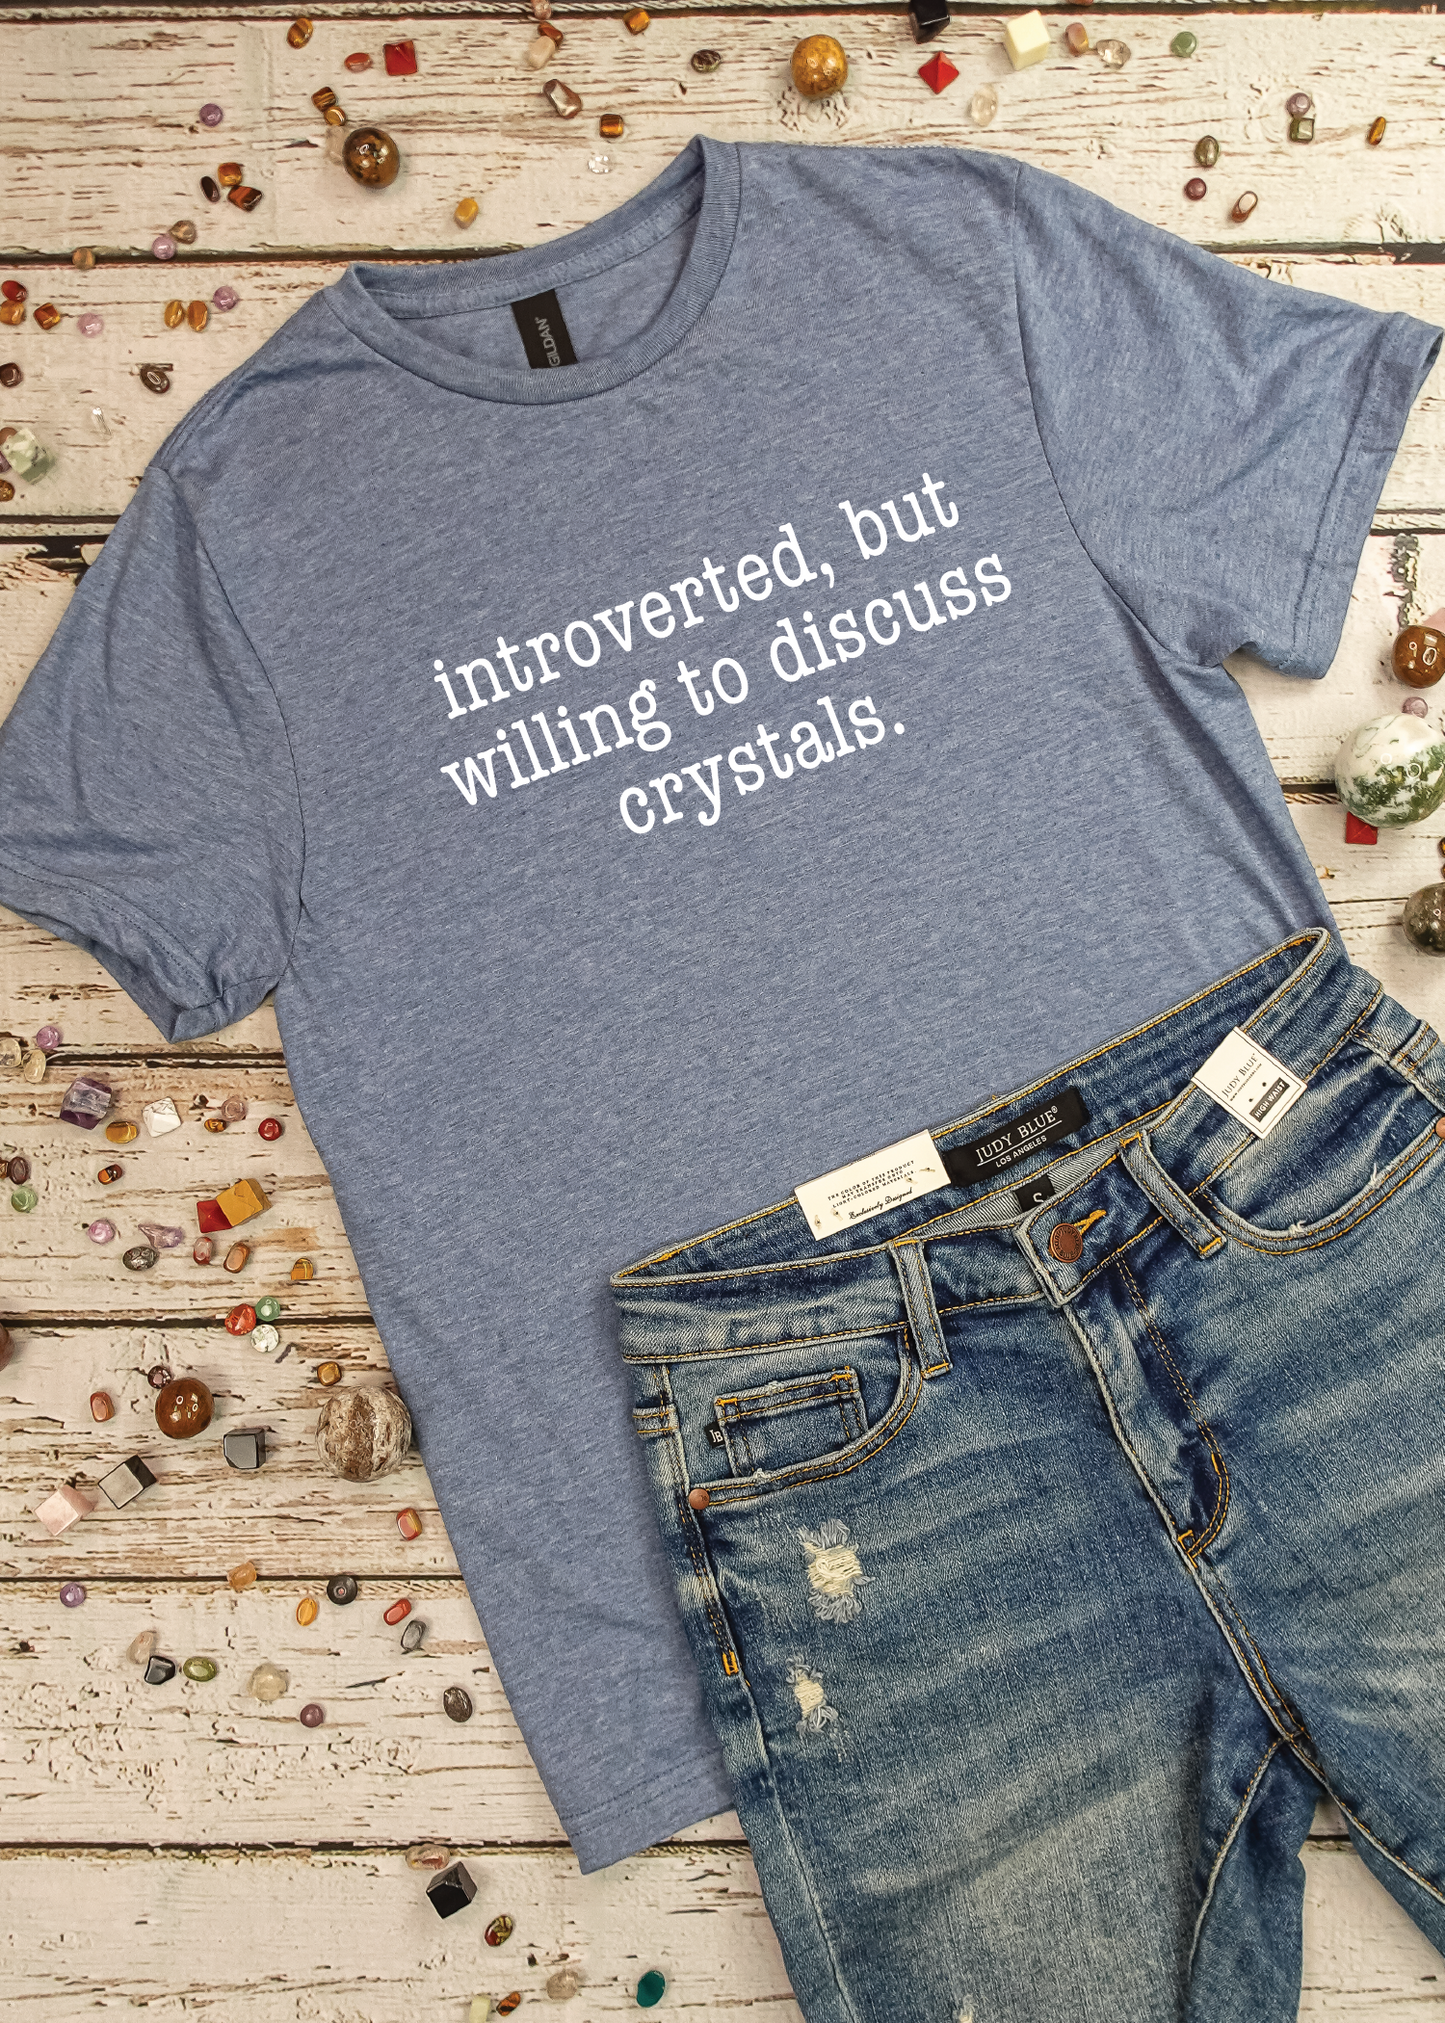 Introverted But Will Discuss Crystals - Graphic Tee